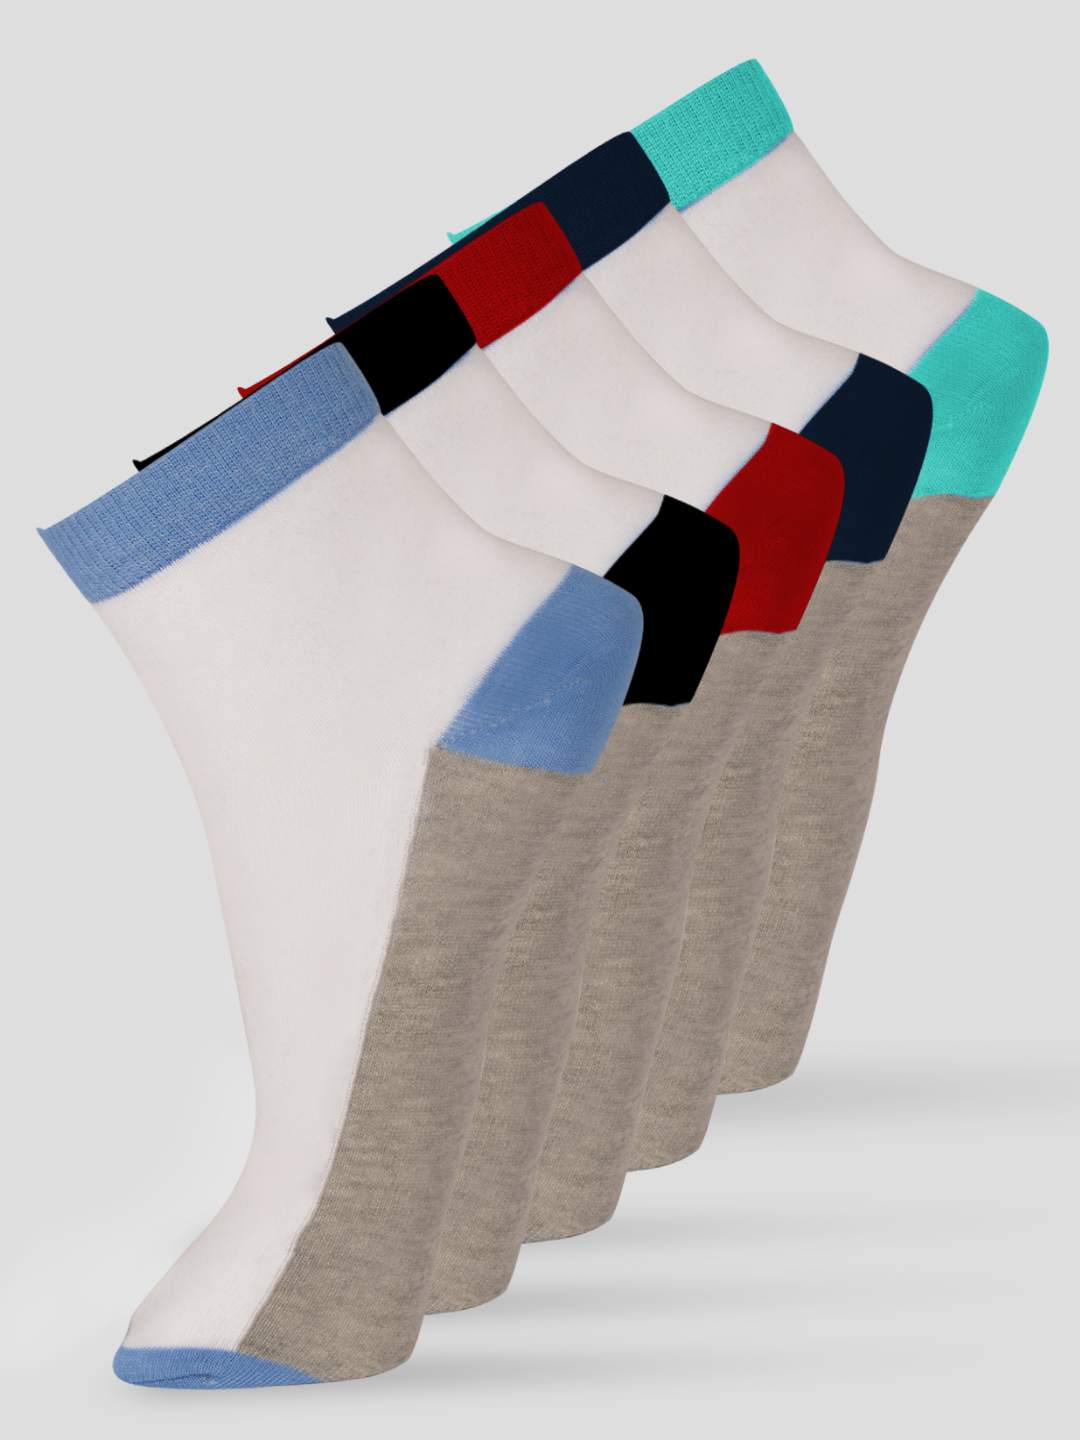 FRENCHIE PO5 SOLID COLOR BLOCKING DESIGN ANKLE LENGTH CUT ASSORTED COTTON  SOCKS 11